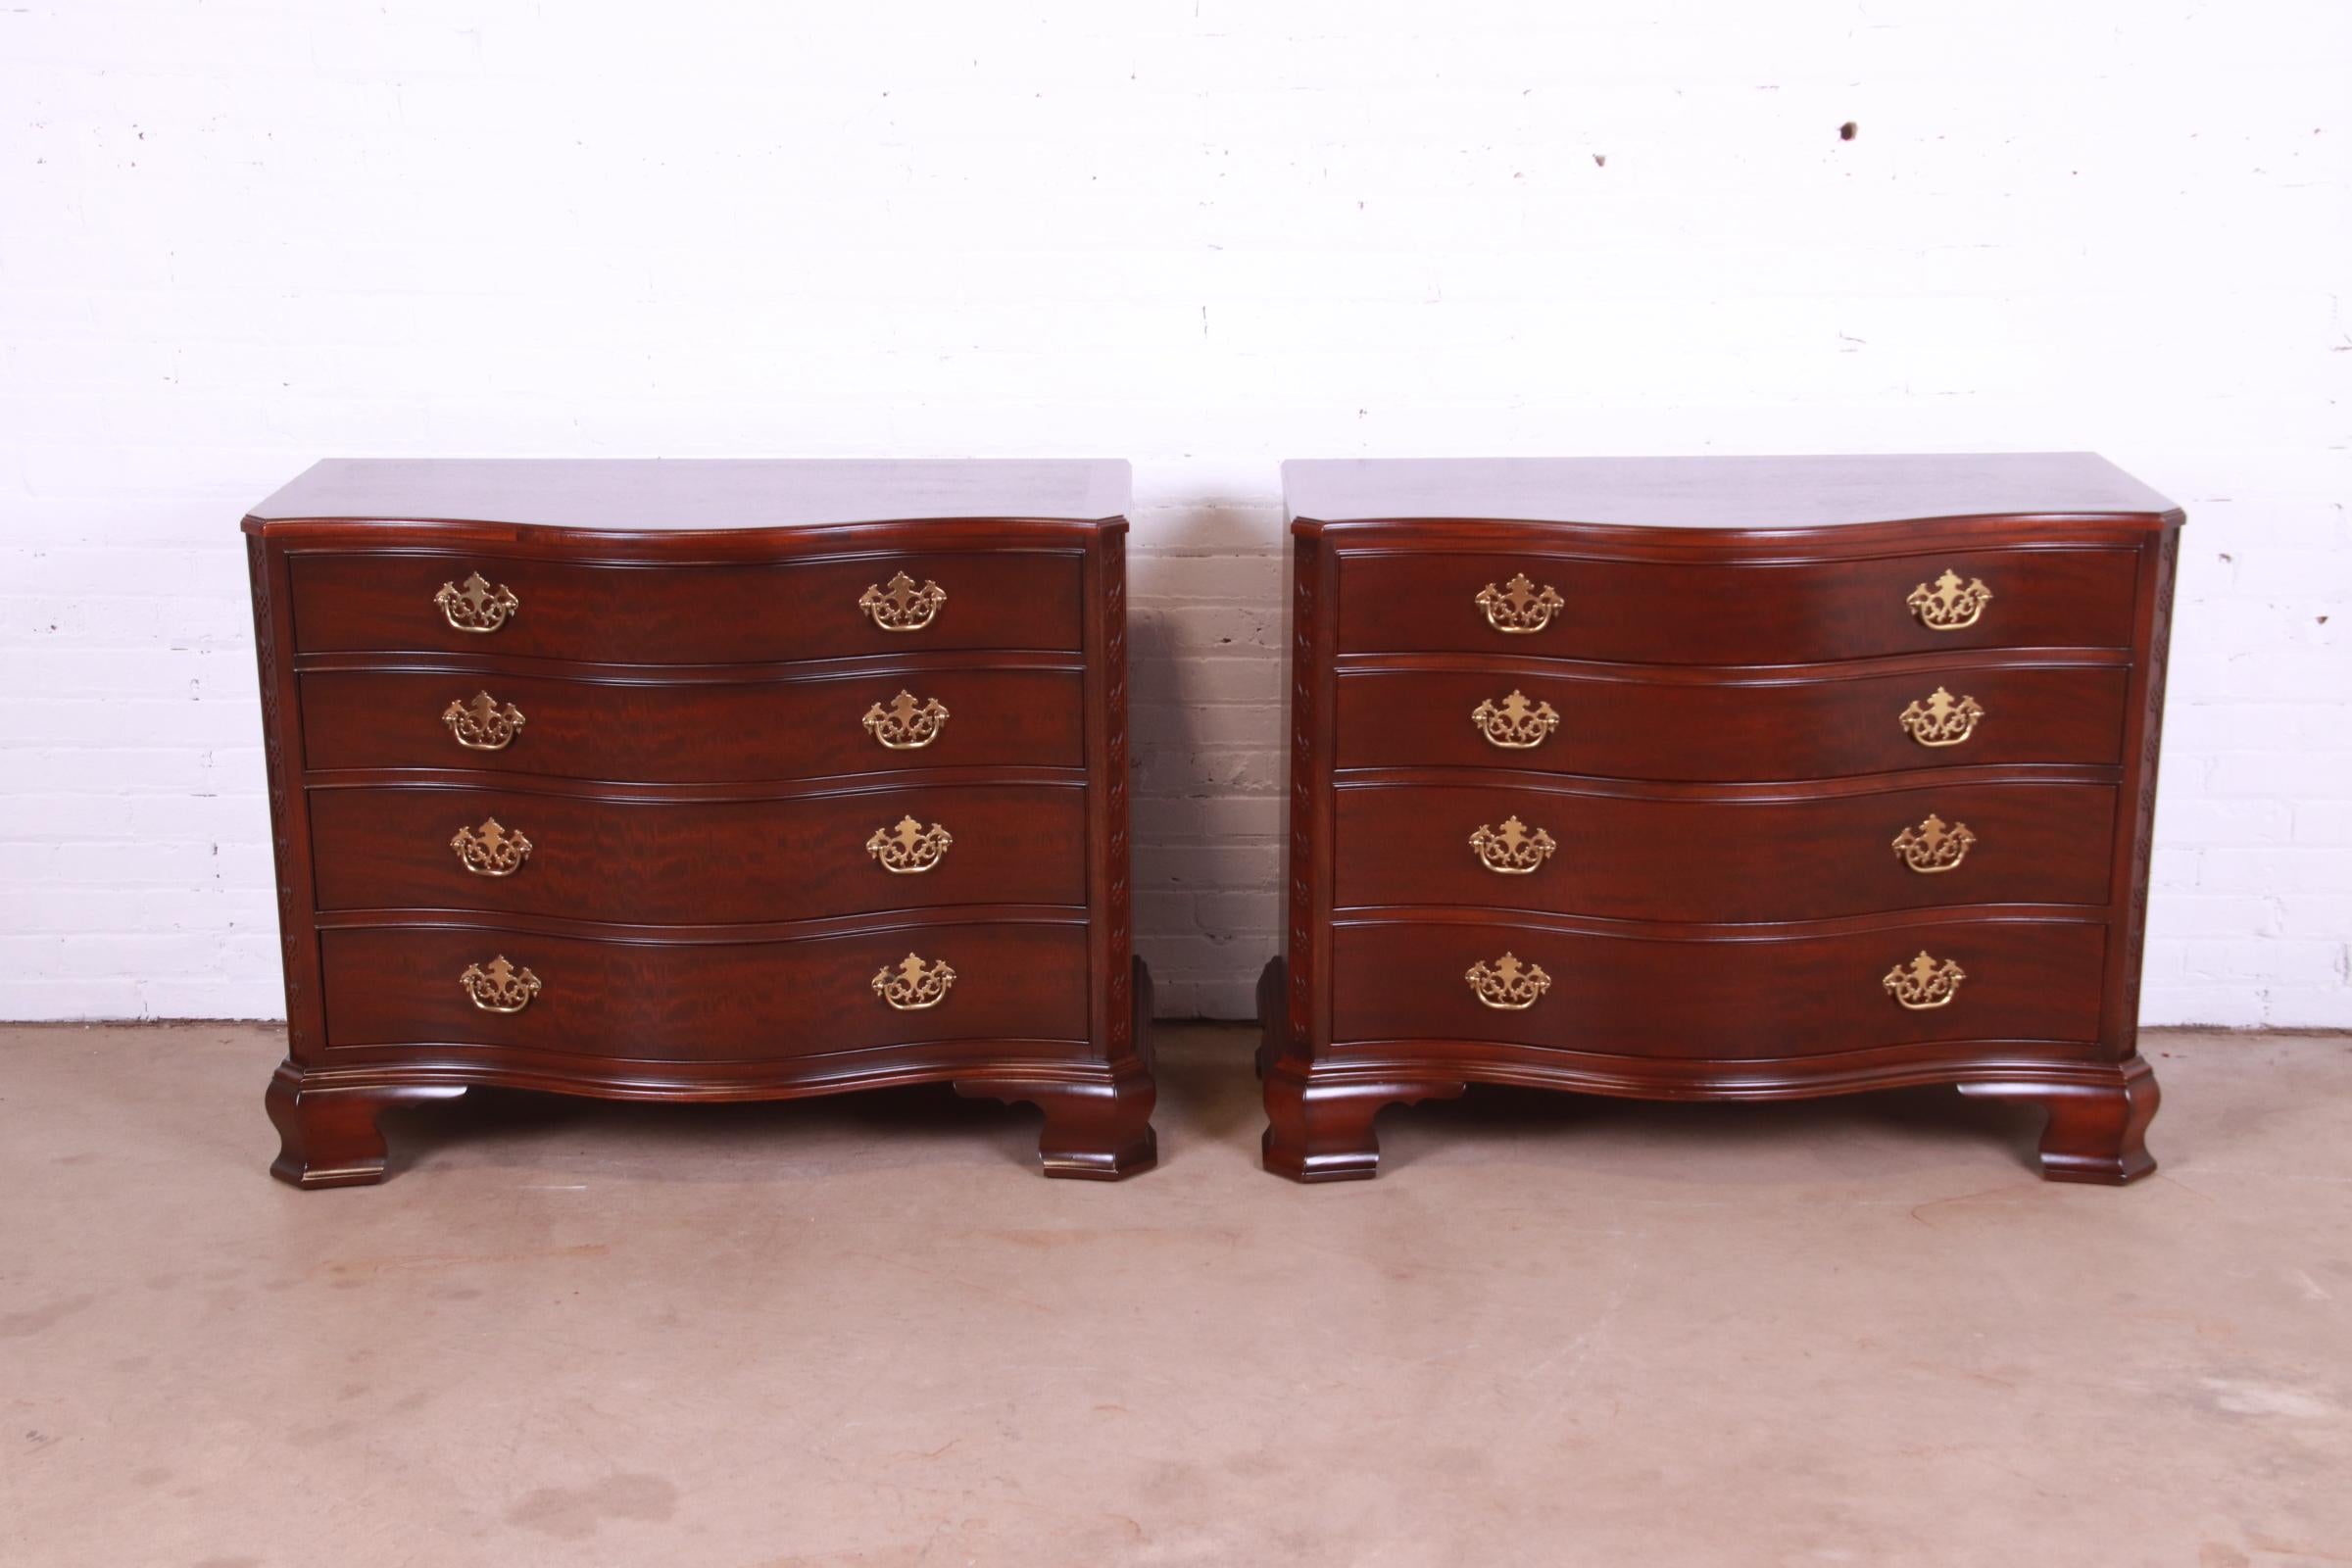 An exceptional pair of Georgian or Chippendale style serpentine front dressers or chests of drawers

By Baker Furniture, 